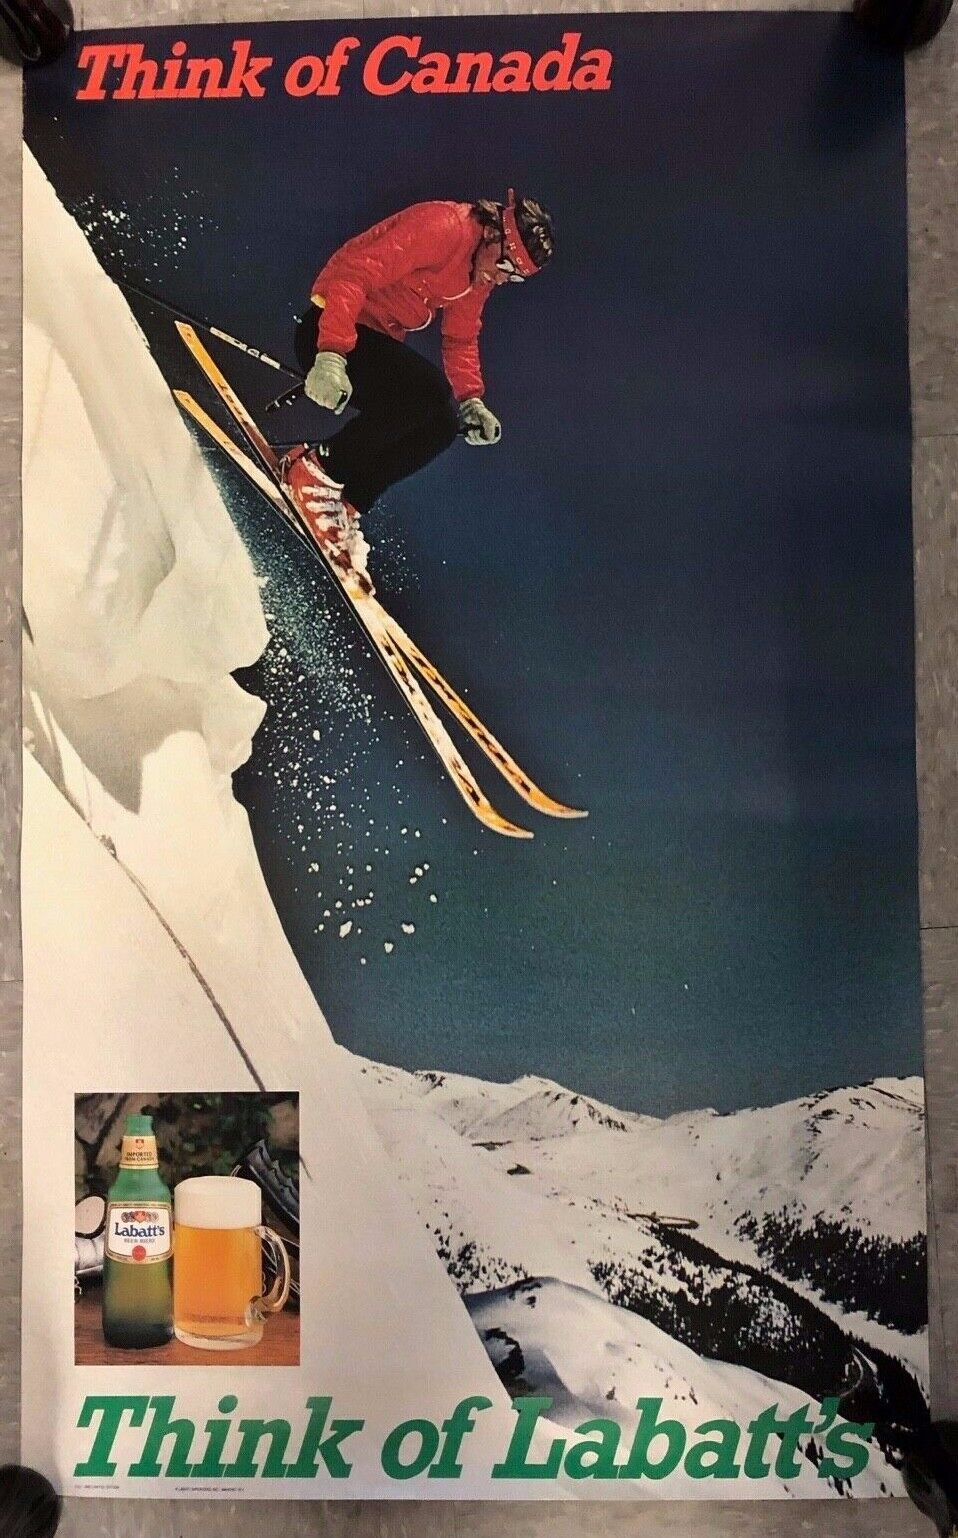 1980 Poster *Think of Labatts Beer* Poster Skiing CANDIAN SKIING 22X36’\' M4 PB16